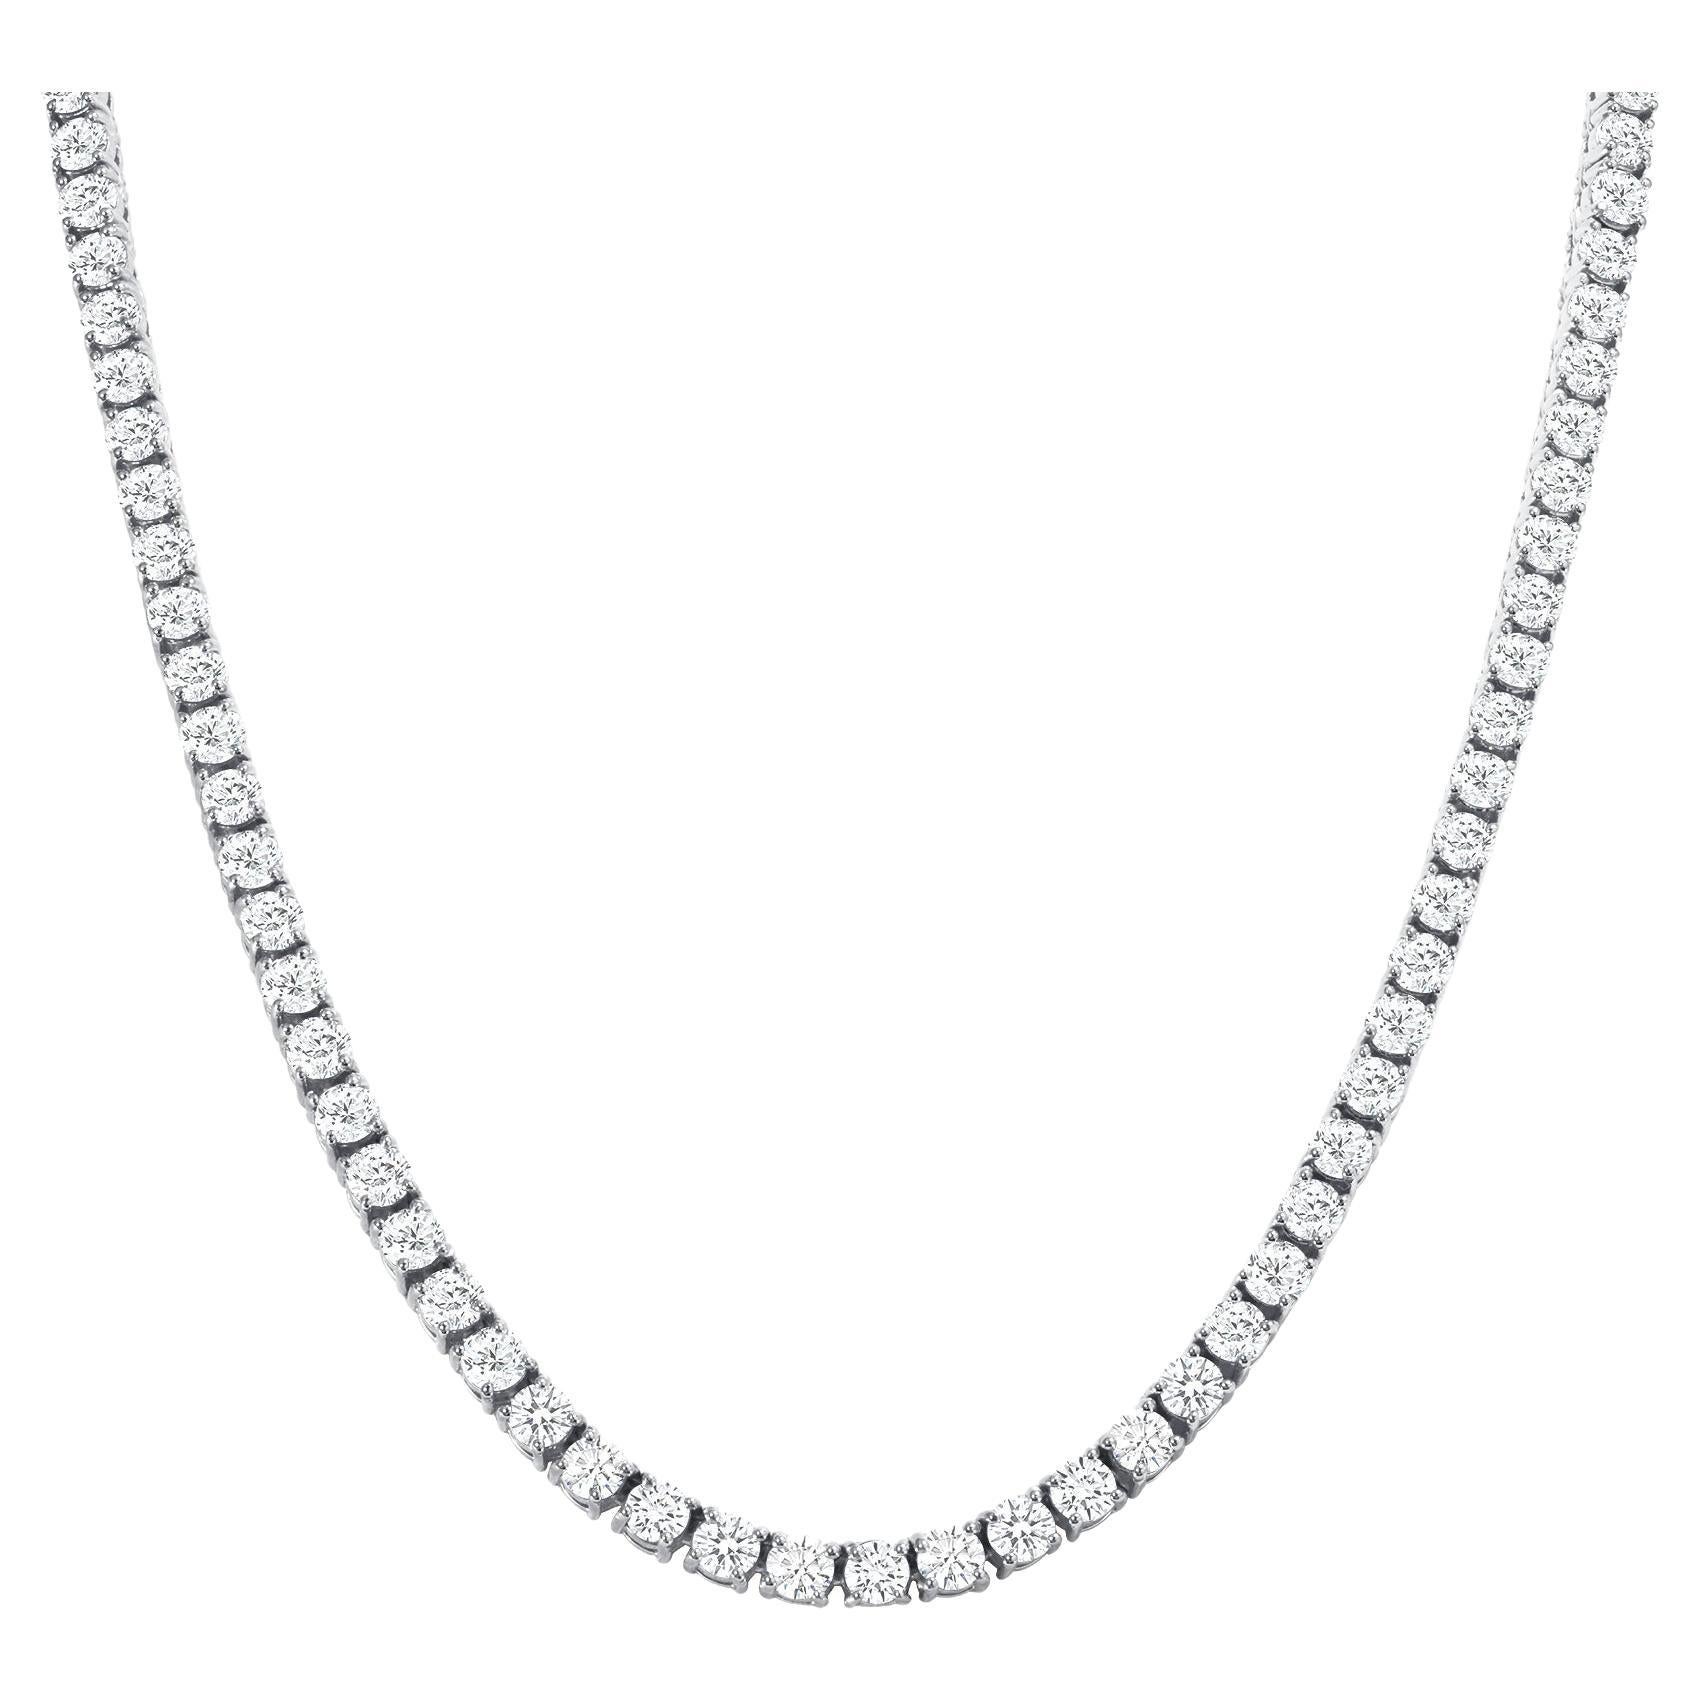 5 Carat Round Natural Diamond Tennis Necklace, 20 inches